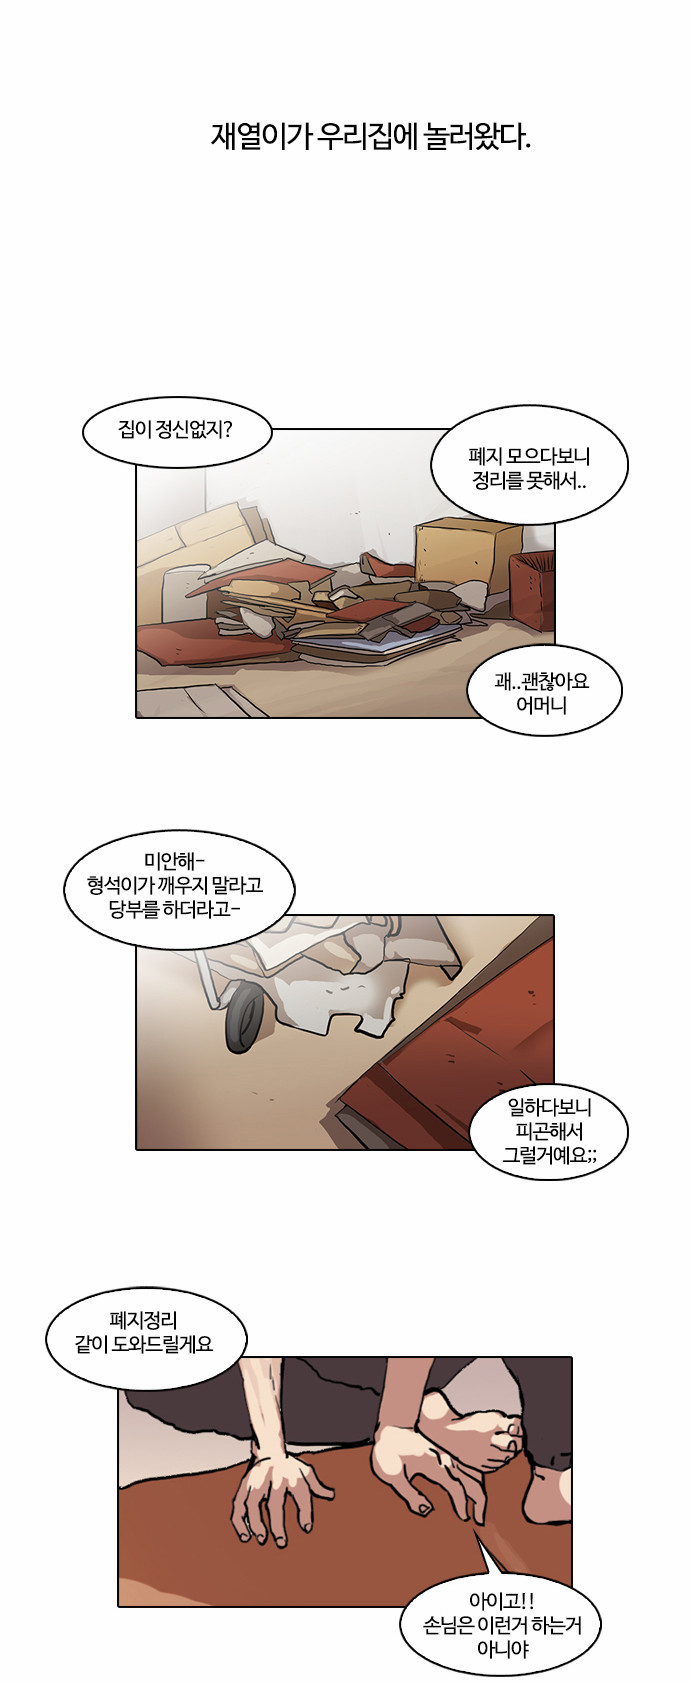 Lookism - Chapter 48 - Page 2